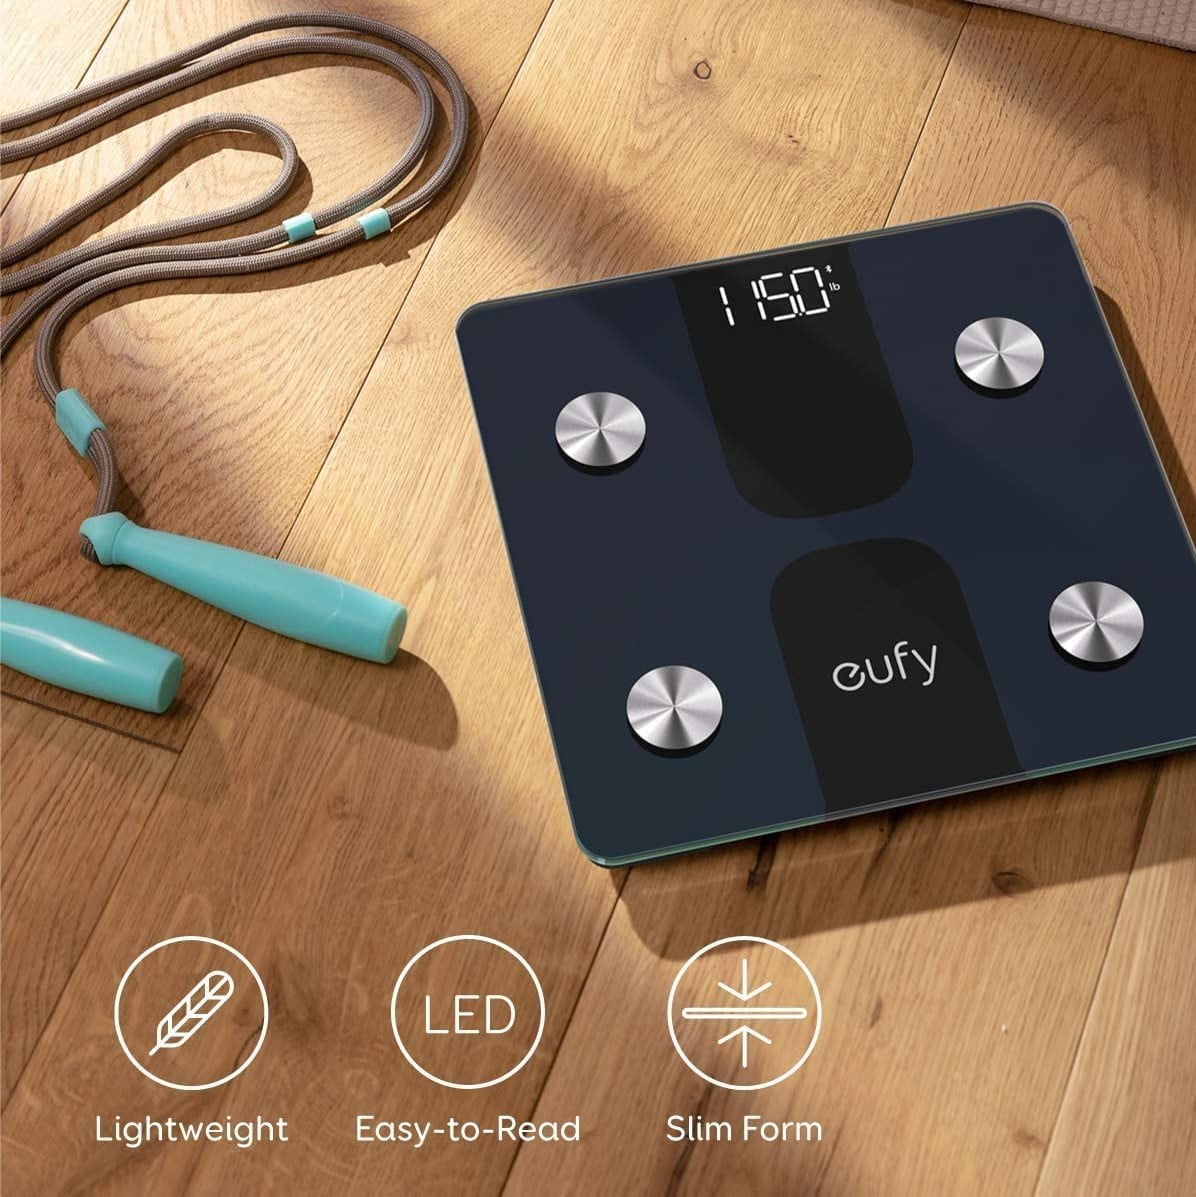 7147Flpktal. Ac Sl1500 1 Eufy &Lt;H1 Class=&Quot;Product-Meta__Title Heading H1&Quot;&Gt;Eufy Smart Scale C1&Lt;/H1&Gt; &Lt;Ul&Gt; &Lt;Li&Gt;Holistic Health: Instantly Learn 12 Insightful Measurements Of Your Body'S Health.&Lt;/Li&Gt; &Lt;Li&Gt;Free Eufylife App &Amp; 3Rd-Party Apps: Track Your Measurements On Apple Health, Google Fit, And Fitbit.&Lt;/Li&Gt; &Lt;Li&Gt;Accuracy Improved By 10%: Two Pairs Of Super-Sensitive G-Shaped Sensors Ensure More Precise Measurements.&Lt;/Li&Gt; &Lt;Li&Gt;For The Whole Family: Track The Health Trends Of Up To 16 Users From One Account,Recognise Each Member Automatically.&Lt;/Li&Gt; &Lt;Li&Gt;What You Get: Smart Scale C1, Aaa Batteries X3, Quick Start Guide, User Manual, And Our Worry-Free 15-Month Warranty.&Lt;/Li&Gt; &Lt;/Ul&Gt; &Lt;H5&Gt;Warranty: Eufy Product Warranty&Lt;/H5&Gt; Smart Scale Eufy Smart Scale C1